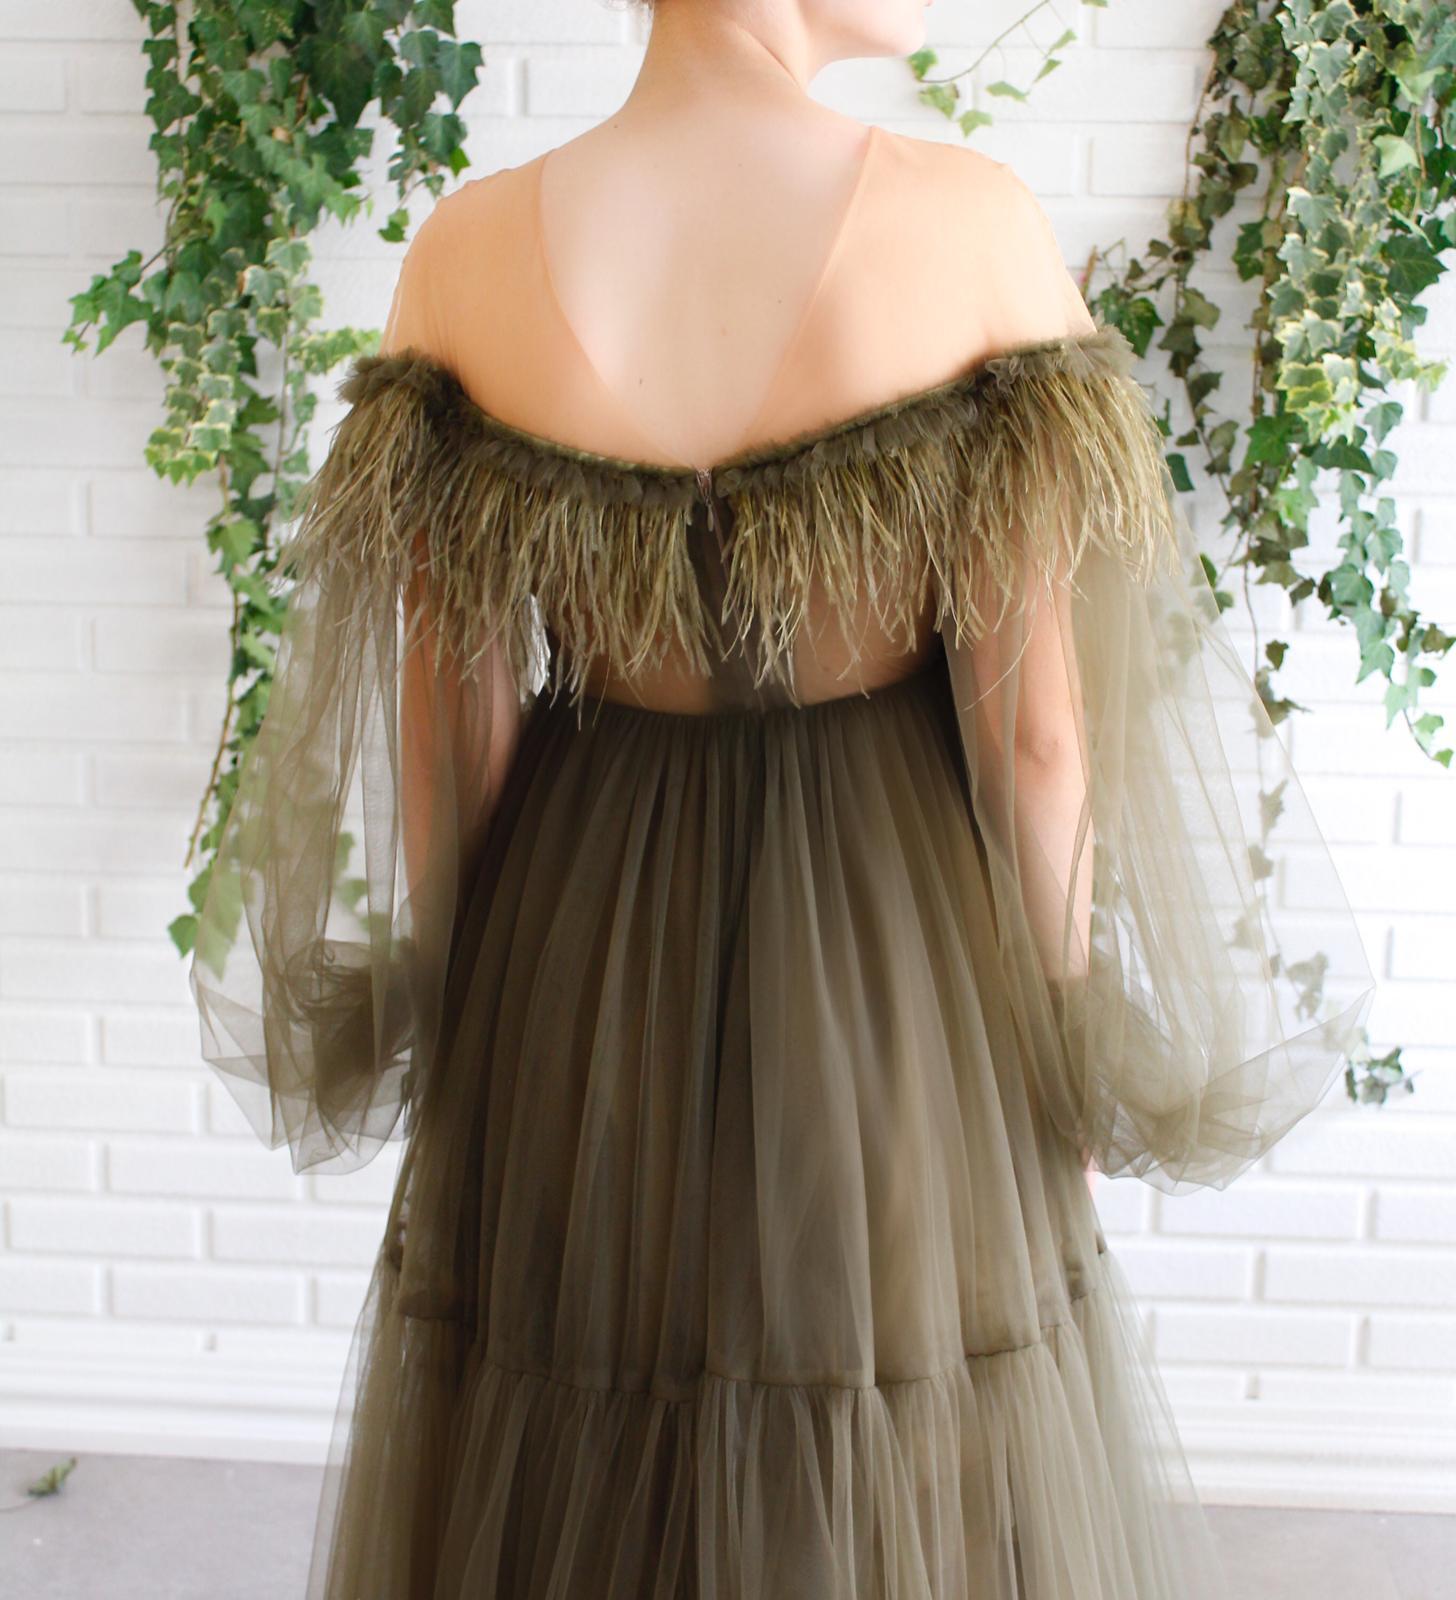 Green A-Line dress with off the shoulder sleeves, embroidery and feathers